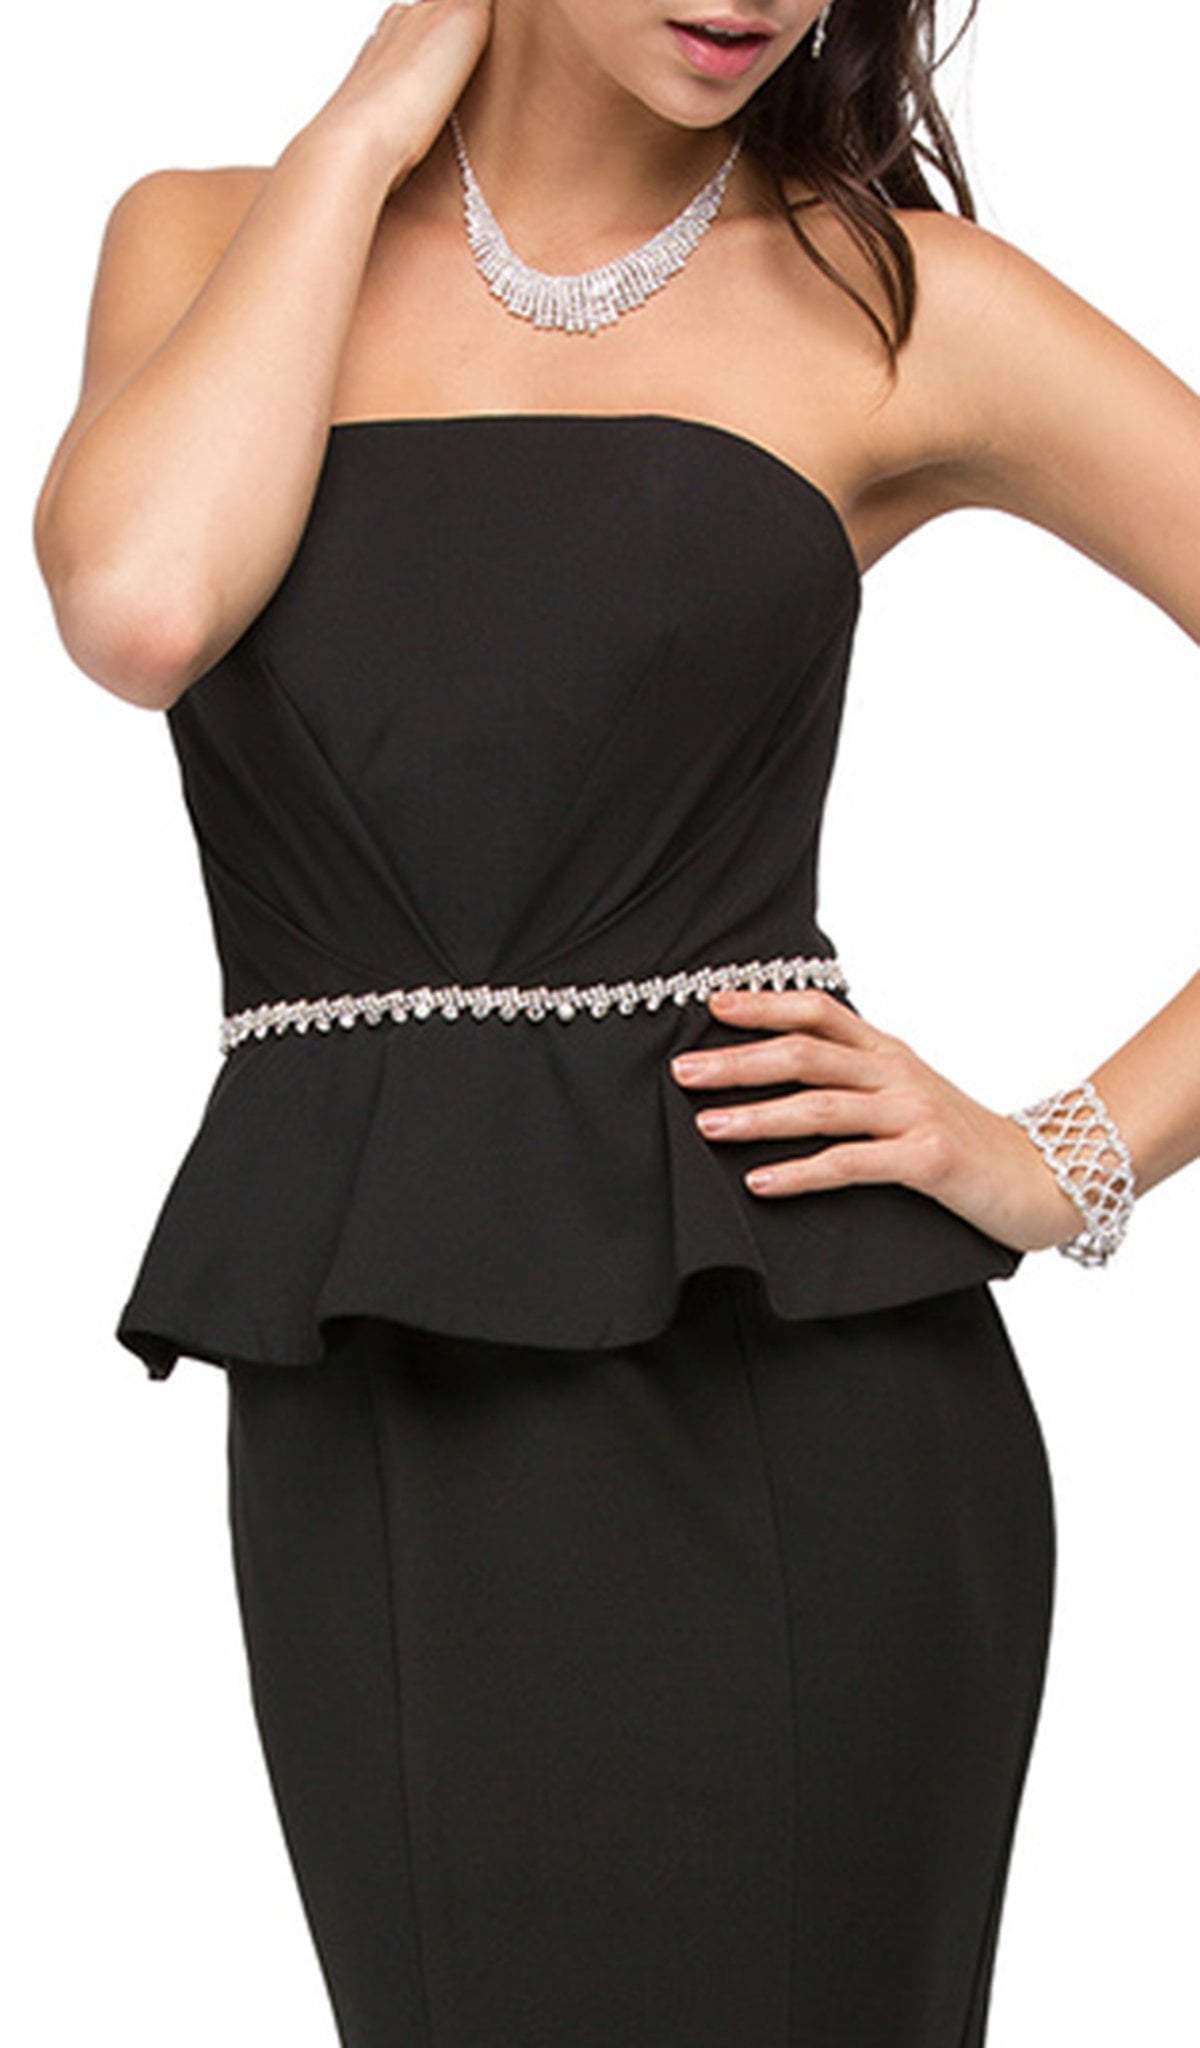 Dancing Queen - 9753 Removable Straps Embellished Peplum Evening Dress Special Occasion Dress S / Black